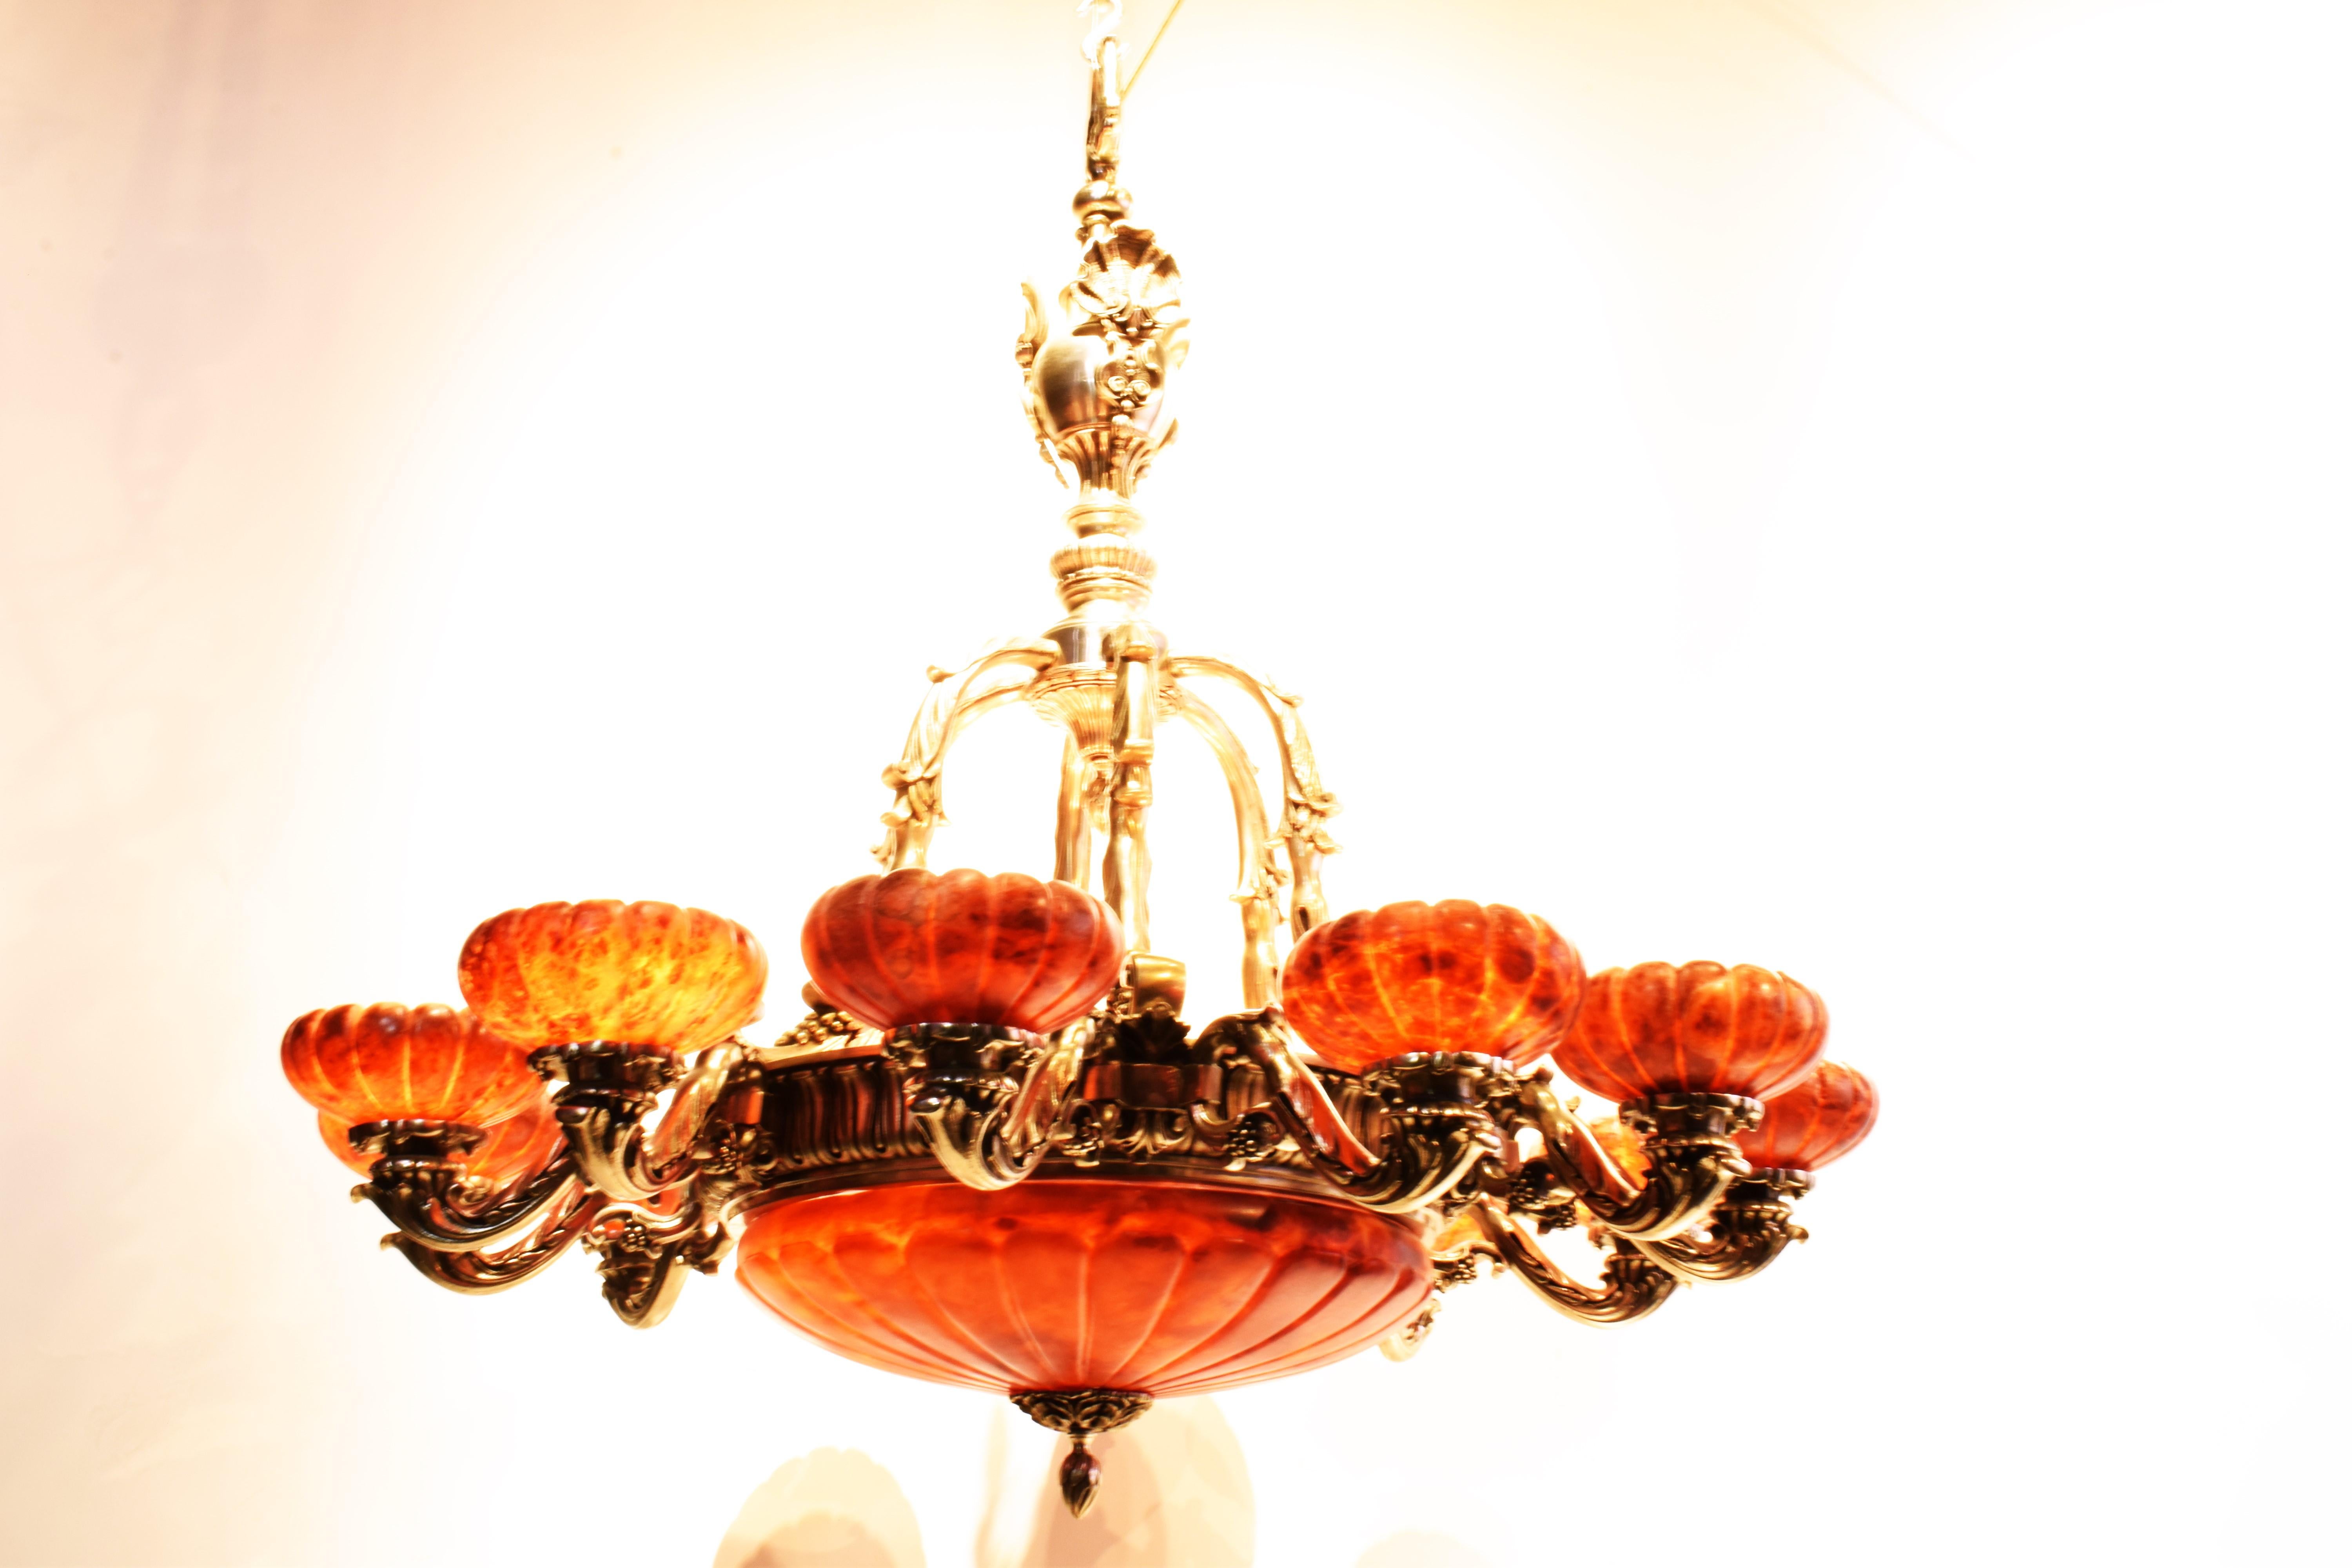 A Very Fine Silver over Bronze & Alabaster Chandelier in the Louis XVI taste featuring turned & hand cut alabaster dome & shades (12). 
16 lights (4 inside dome, 12 lighted arms)
France, circa 1920
Dimensions: Height 46